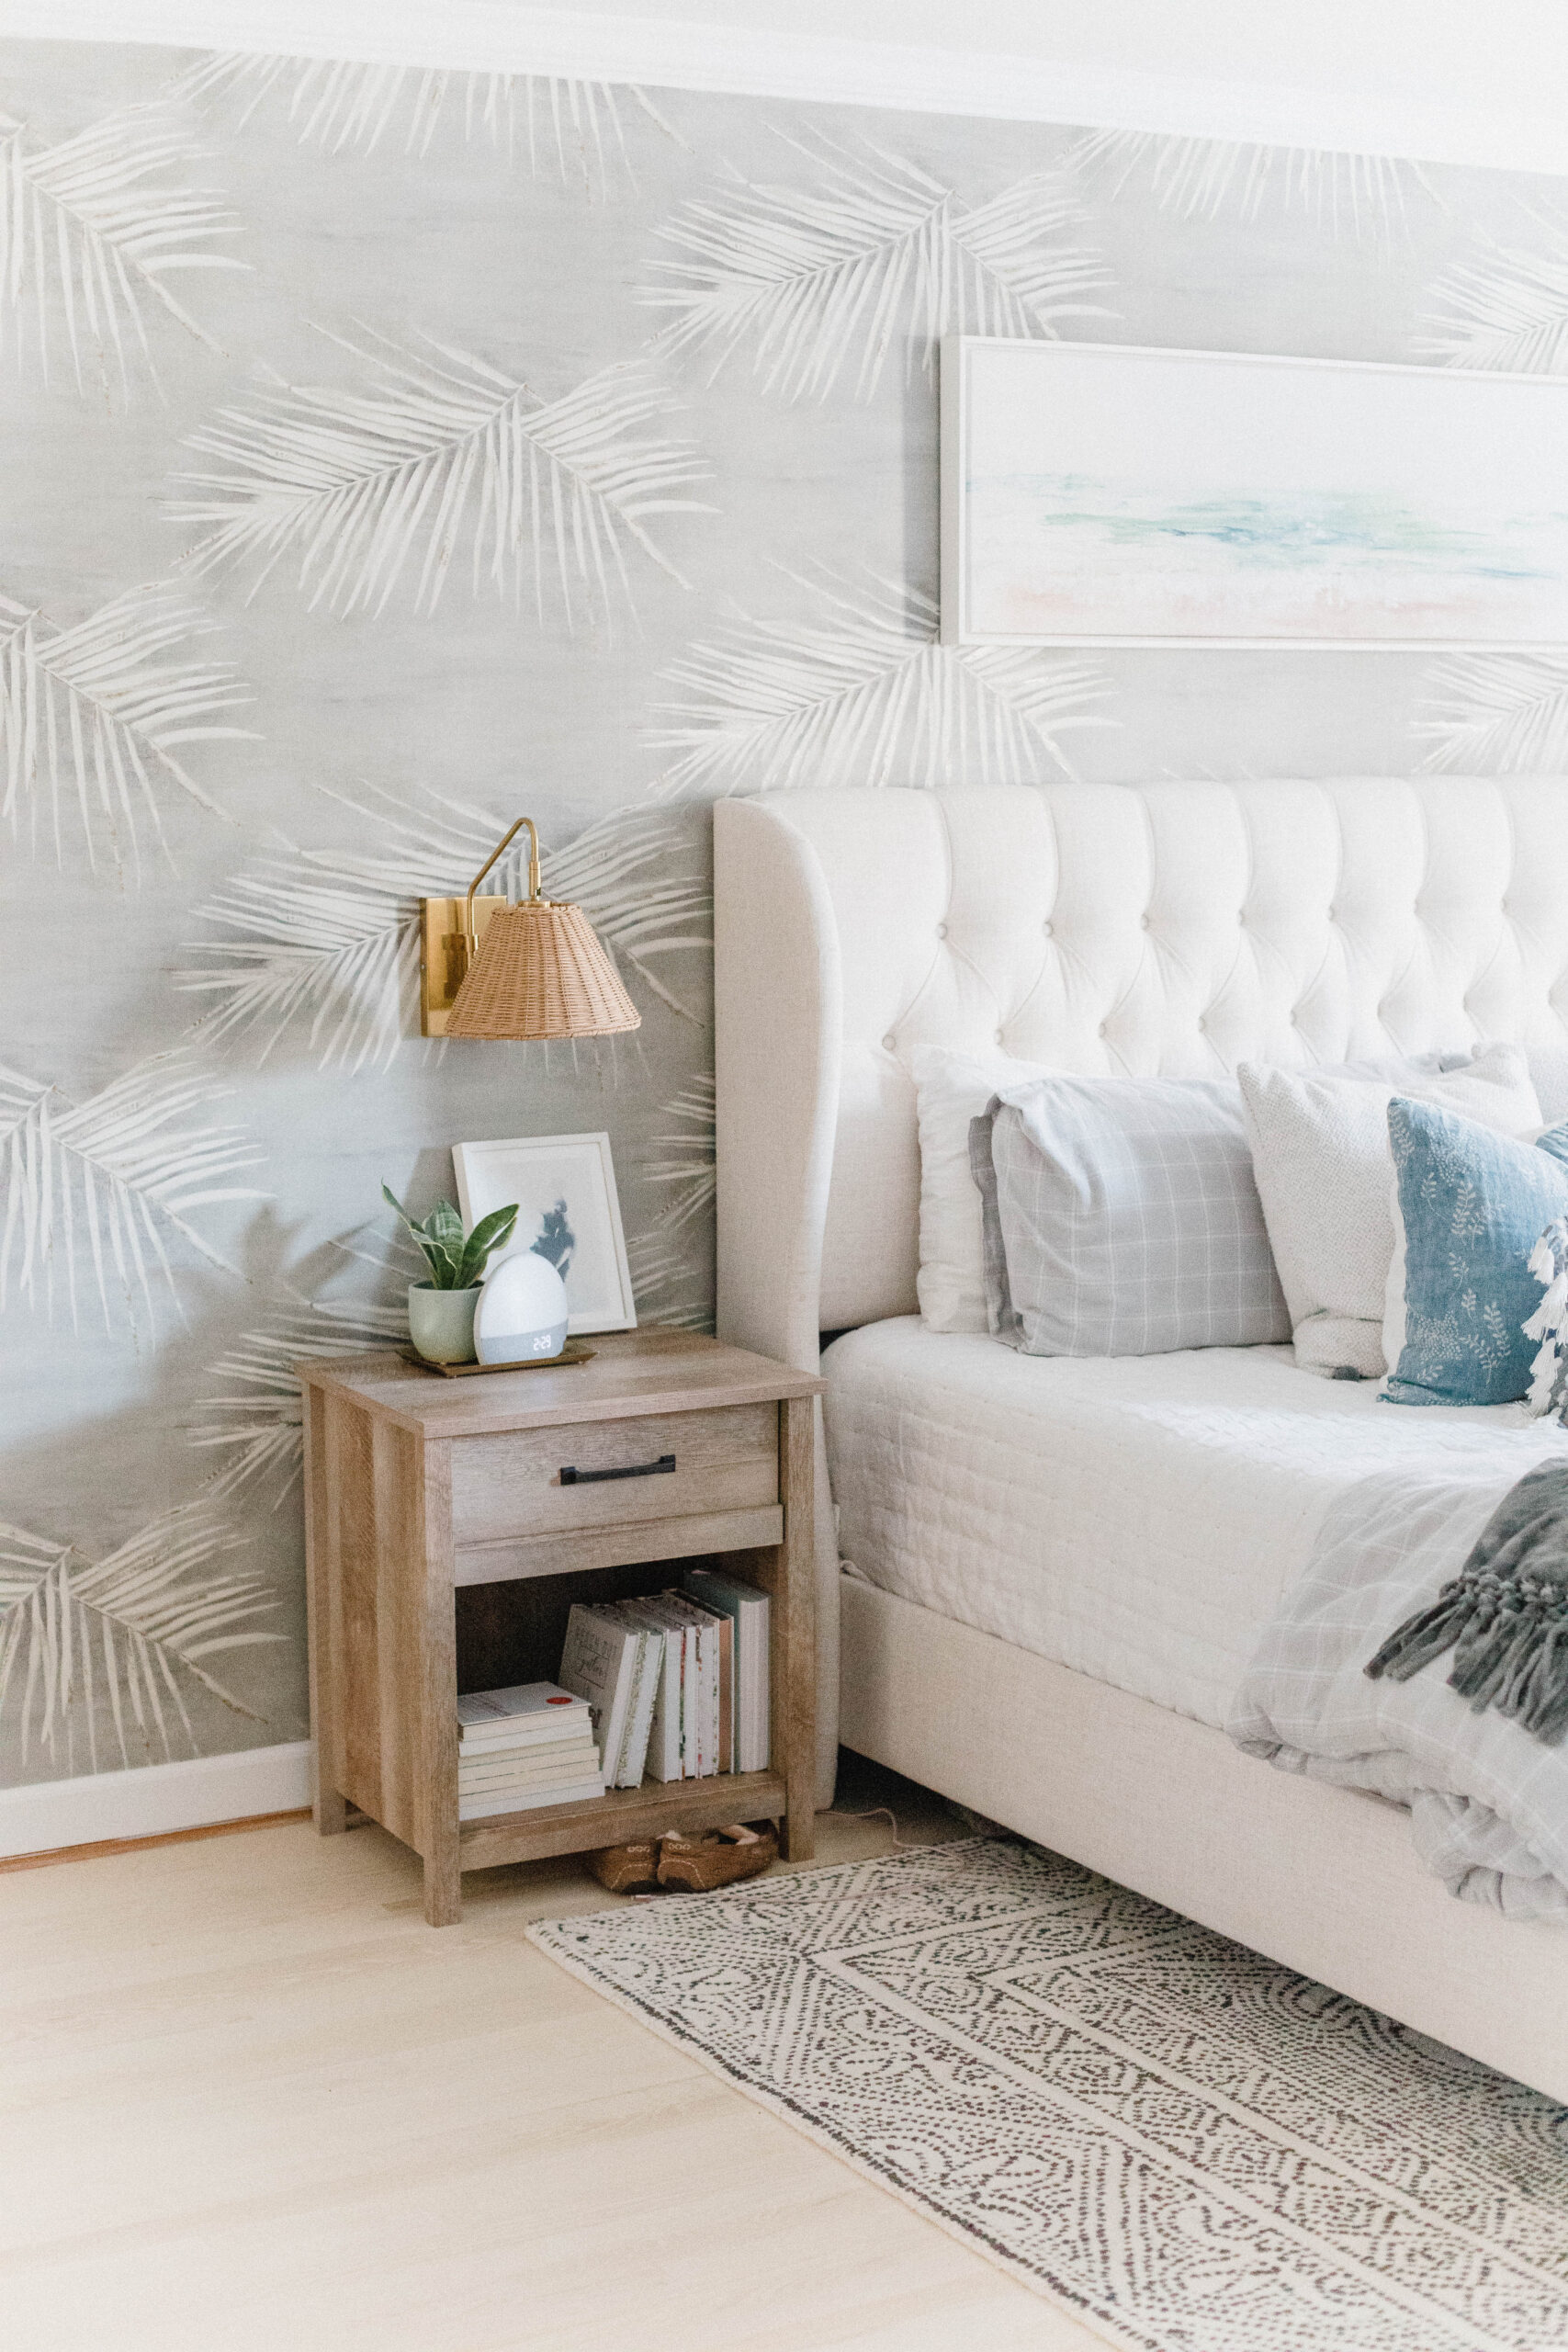 Connecticut life and style blogger Lauren McBride shares how she installed traditional wallpaper and what she learned in the process.